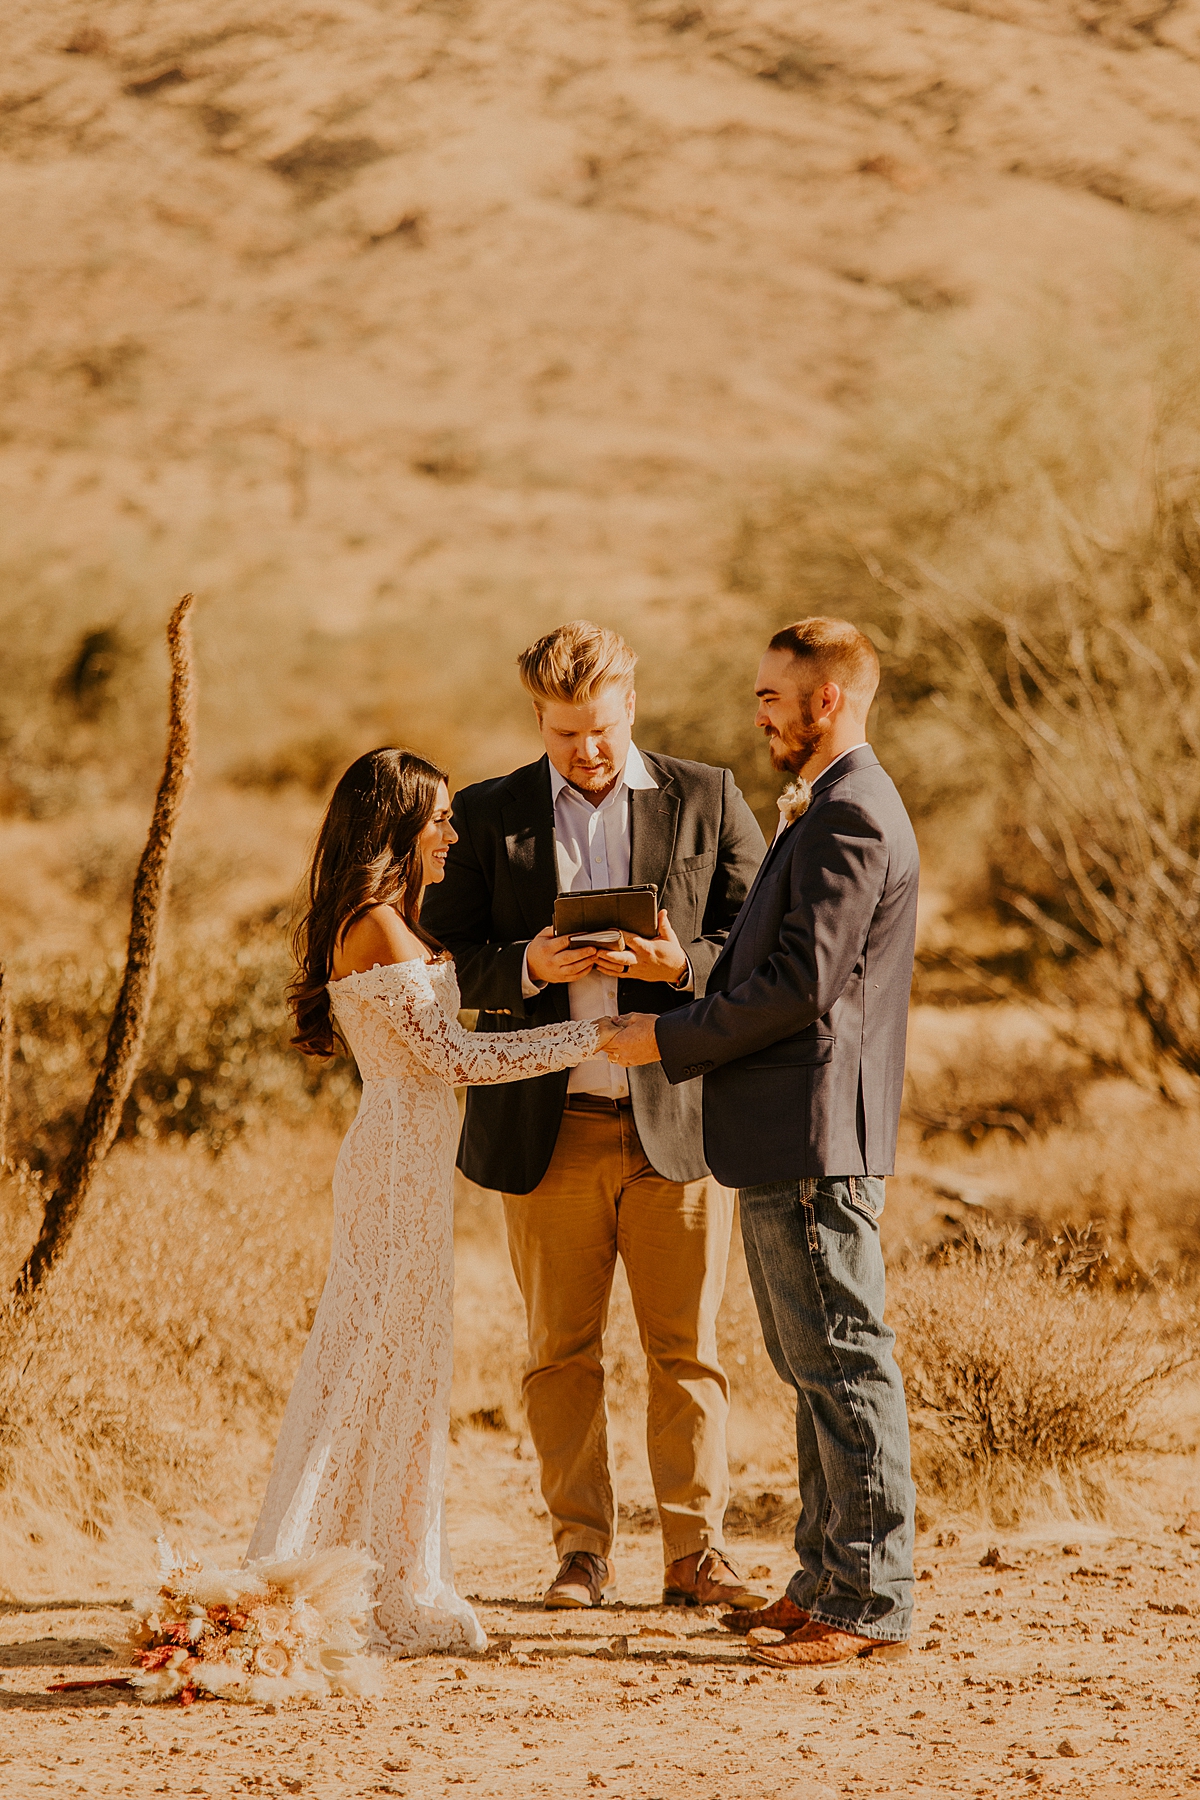 Intimate-elopement-in-superstition-mountain-wilderness-allison-slater-photography15.jpg